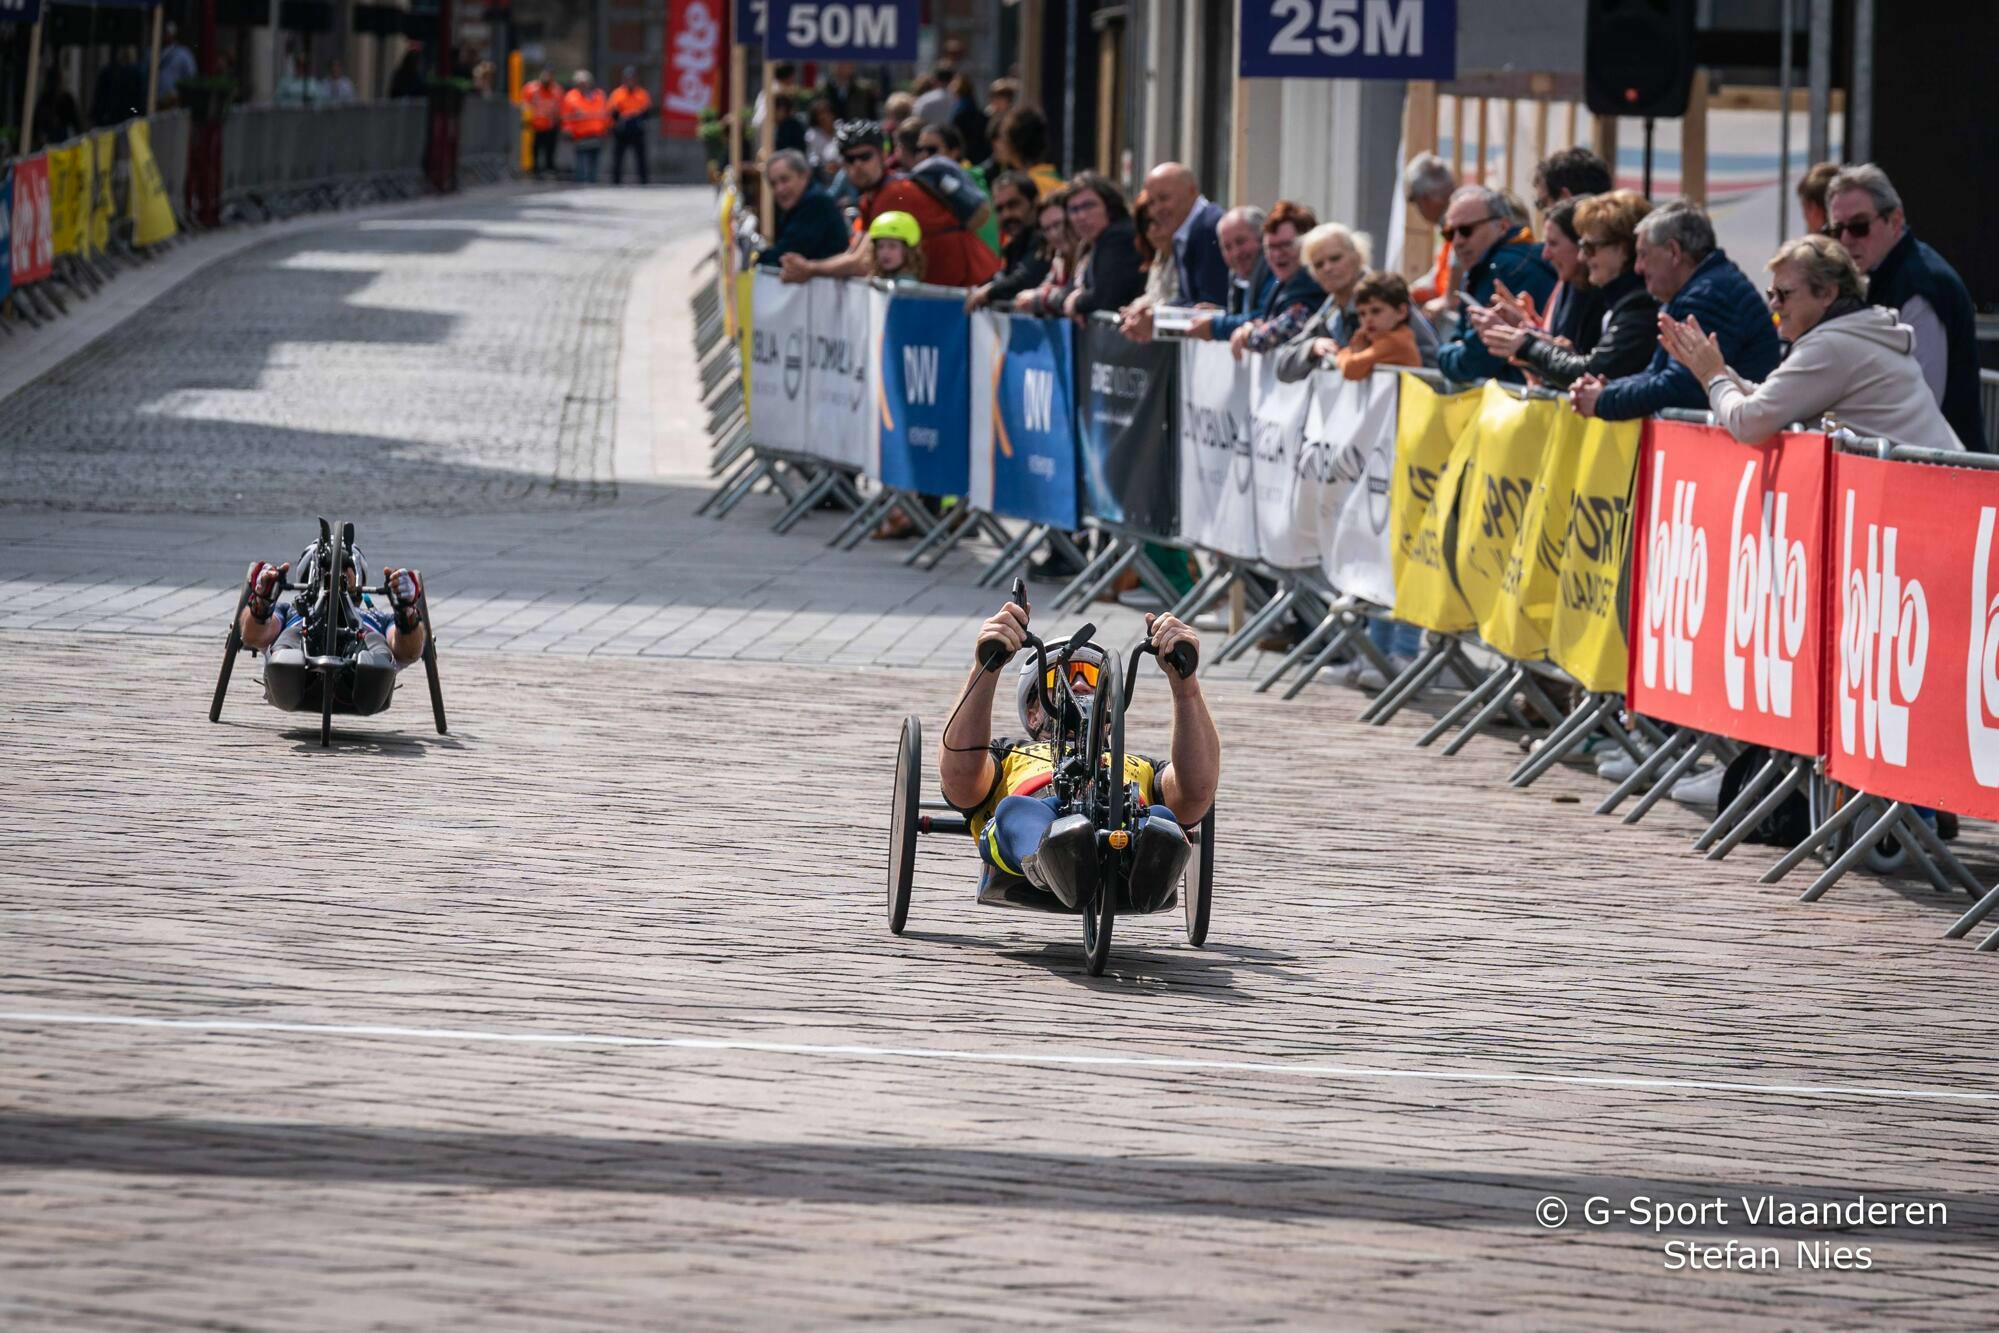 Paracycling added to the Gent-Wevelgem programme in Ypres